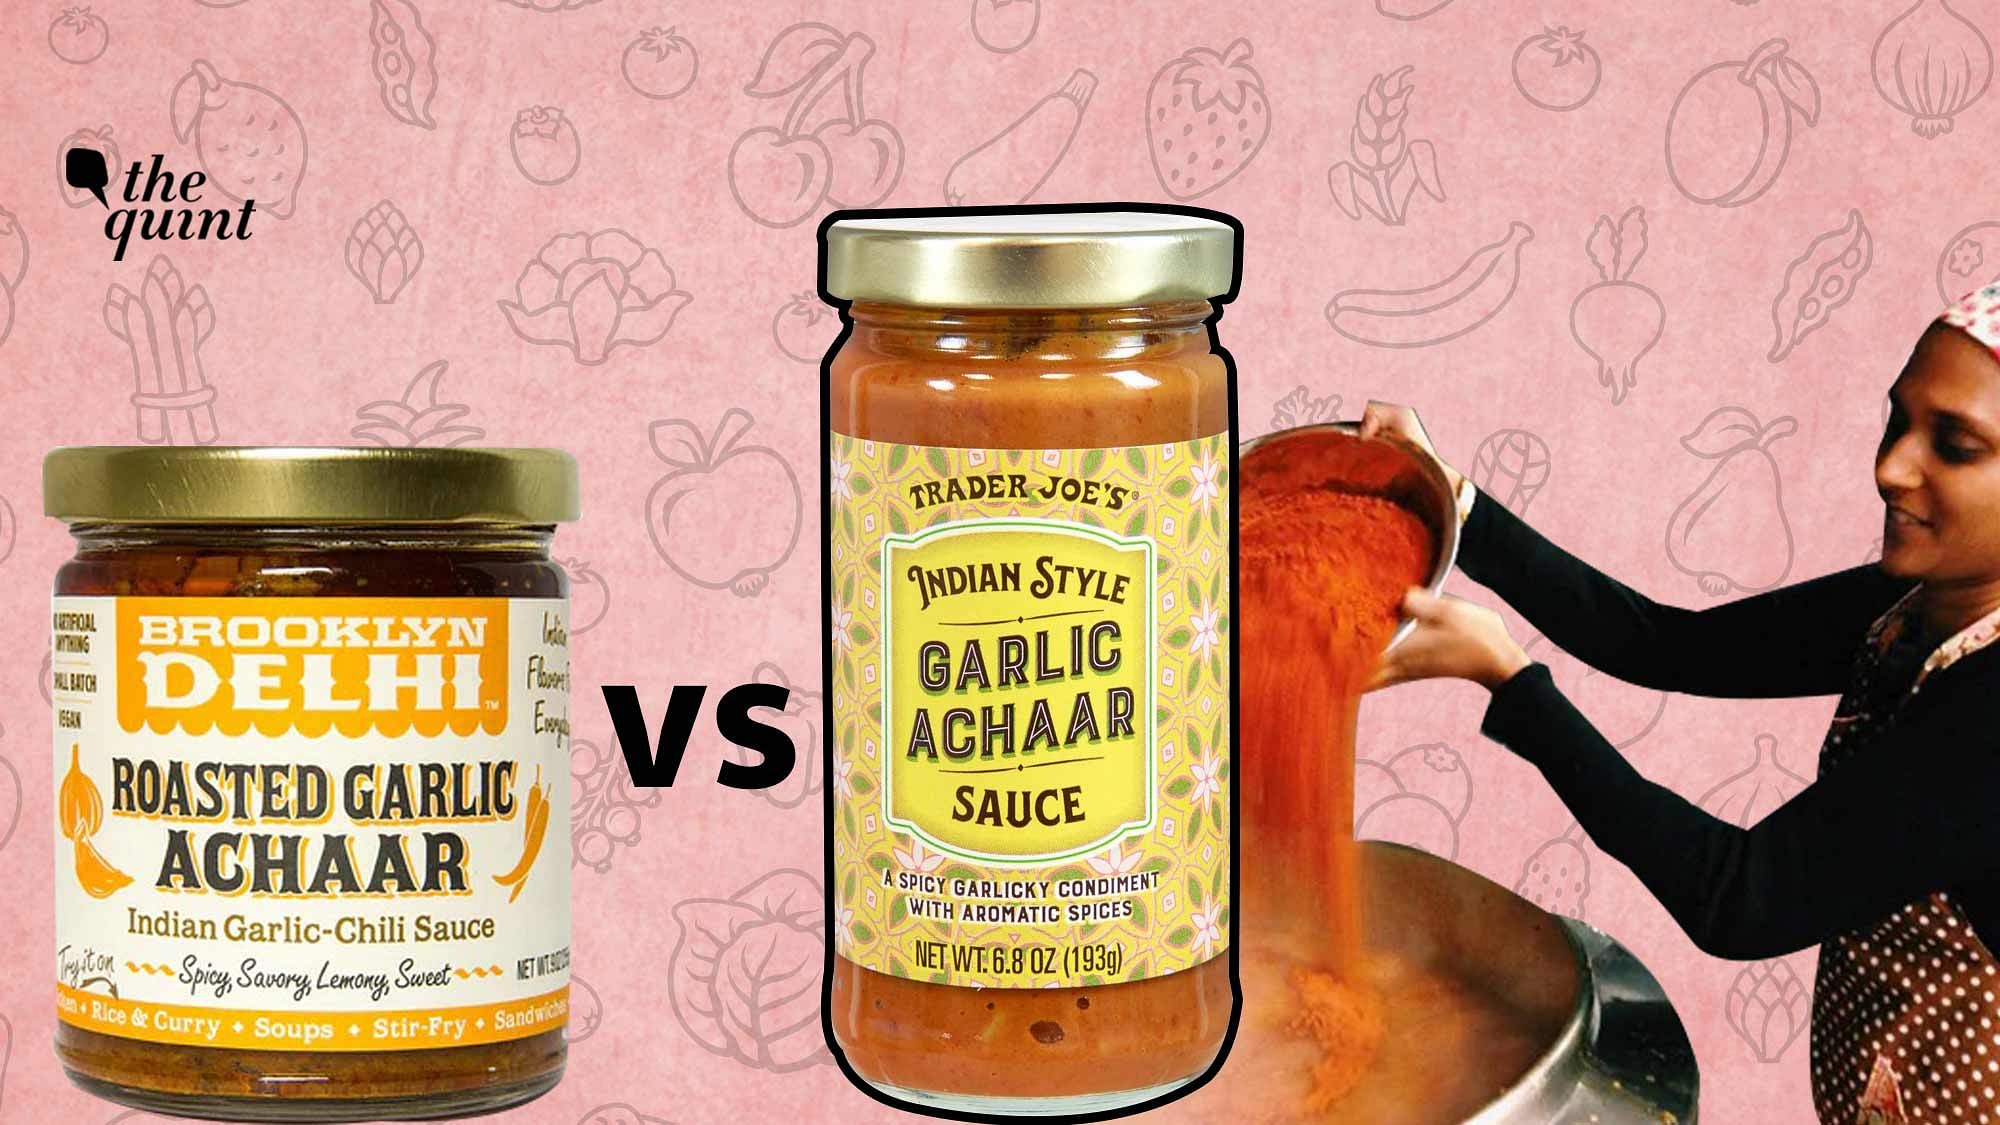 <div class="paragraphs"><p>'Brooklyn Delhi' CEO Chitra Agrawal shares authentic Indian recipes and says Trader Joe's achaar is "watered-down."</p></div>